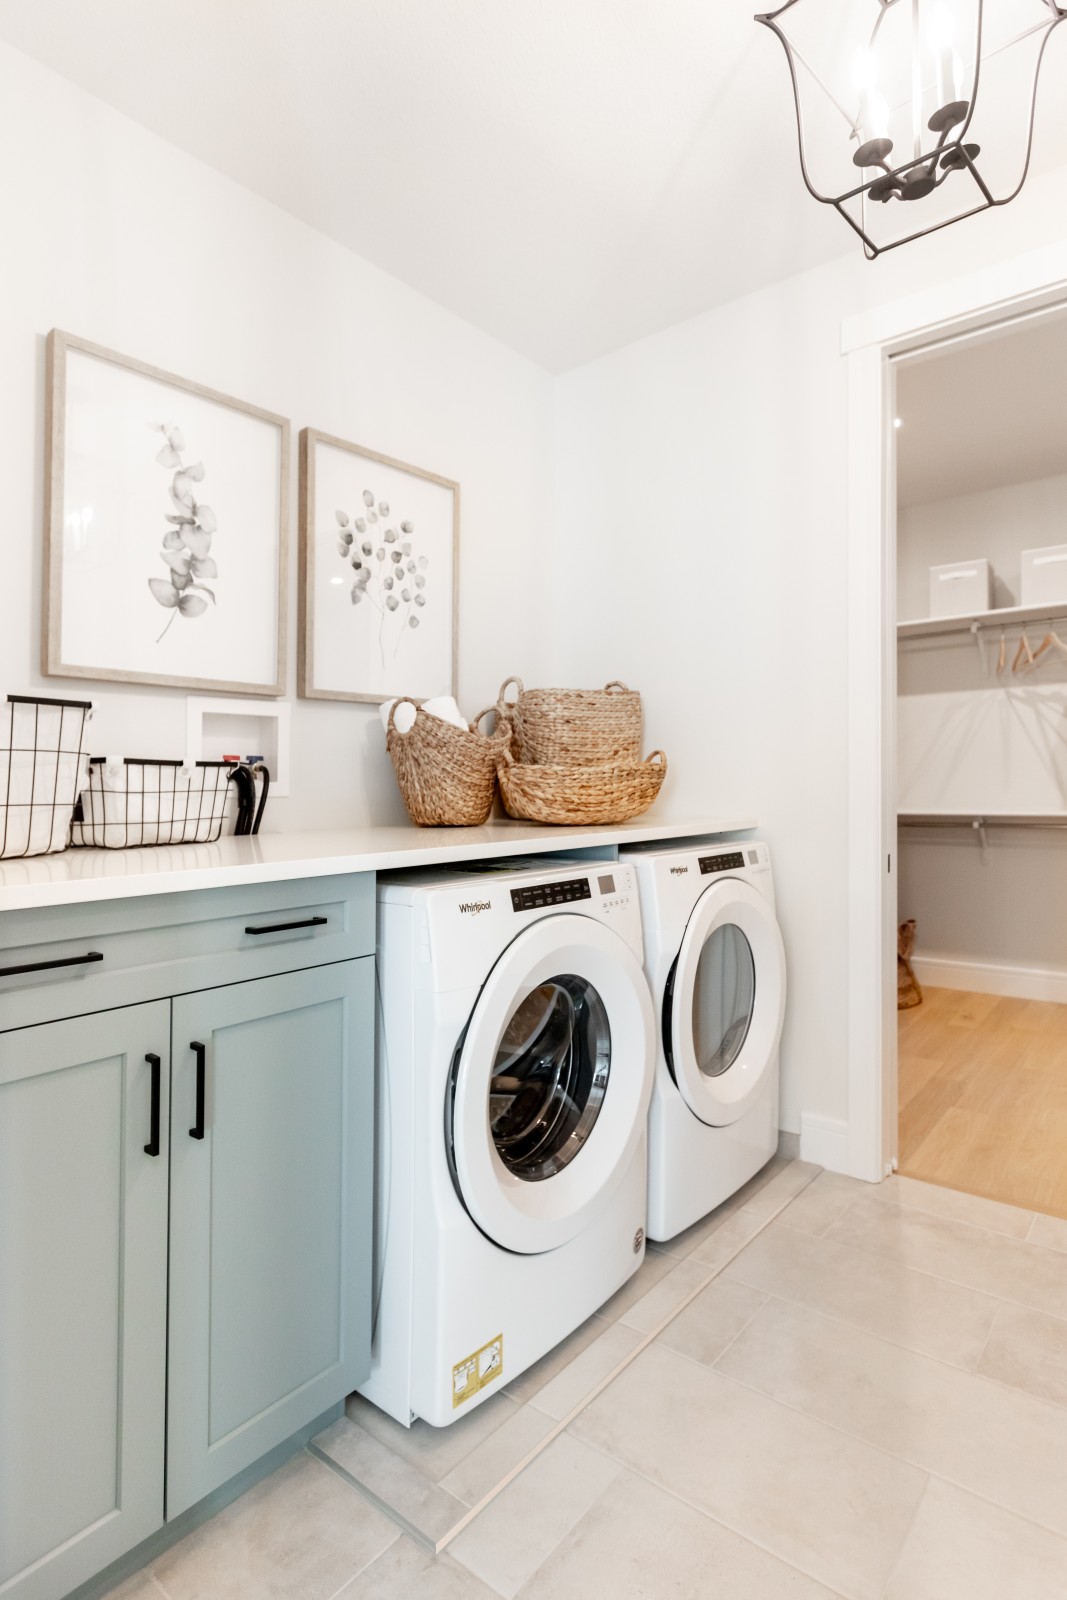 Light blue cabinetry in the Kalliope Griesbach showhome laundry room with white countertop above front load appliances. Natural light art with wood frames hang on the wall and compliment the wicker baskets on the countertop